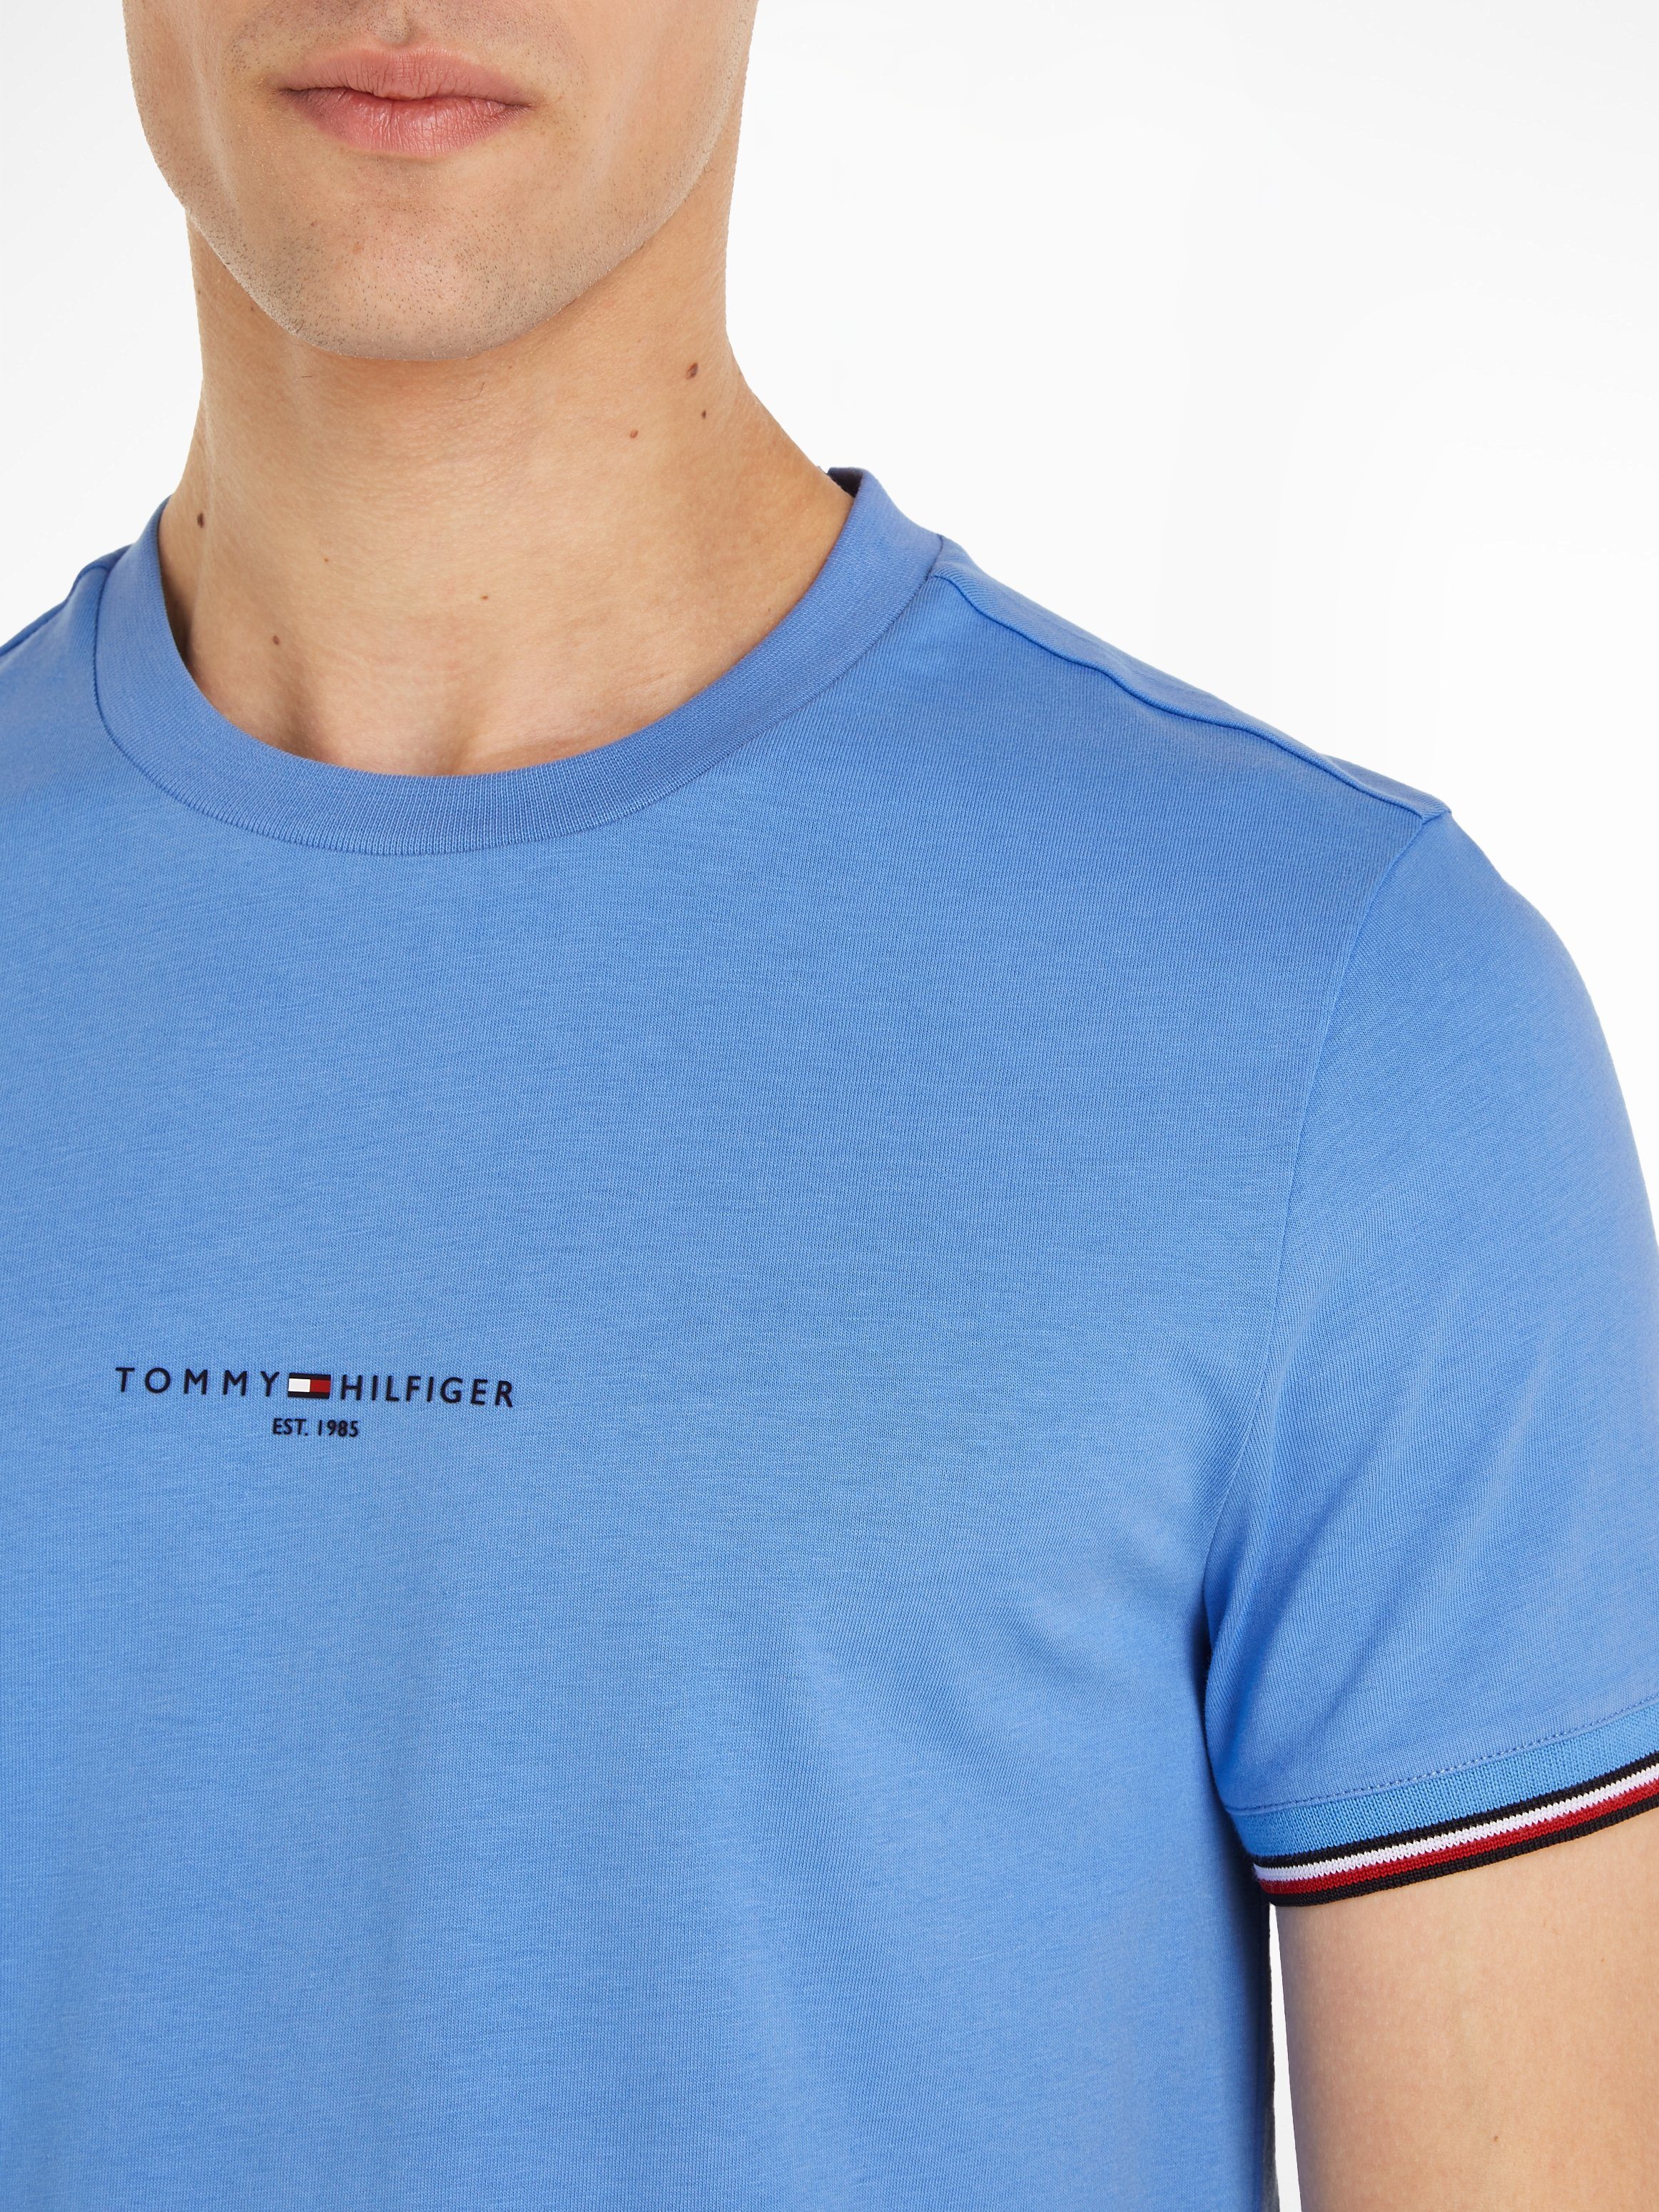 TOMMY TEE Hilfiger T-Shirt blue LOGO TIPPED Tommy spell